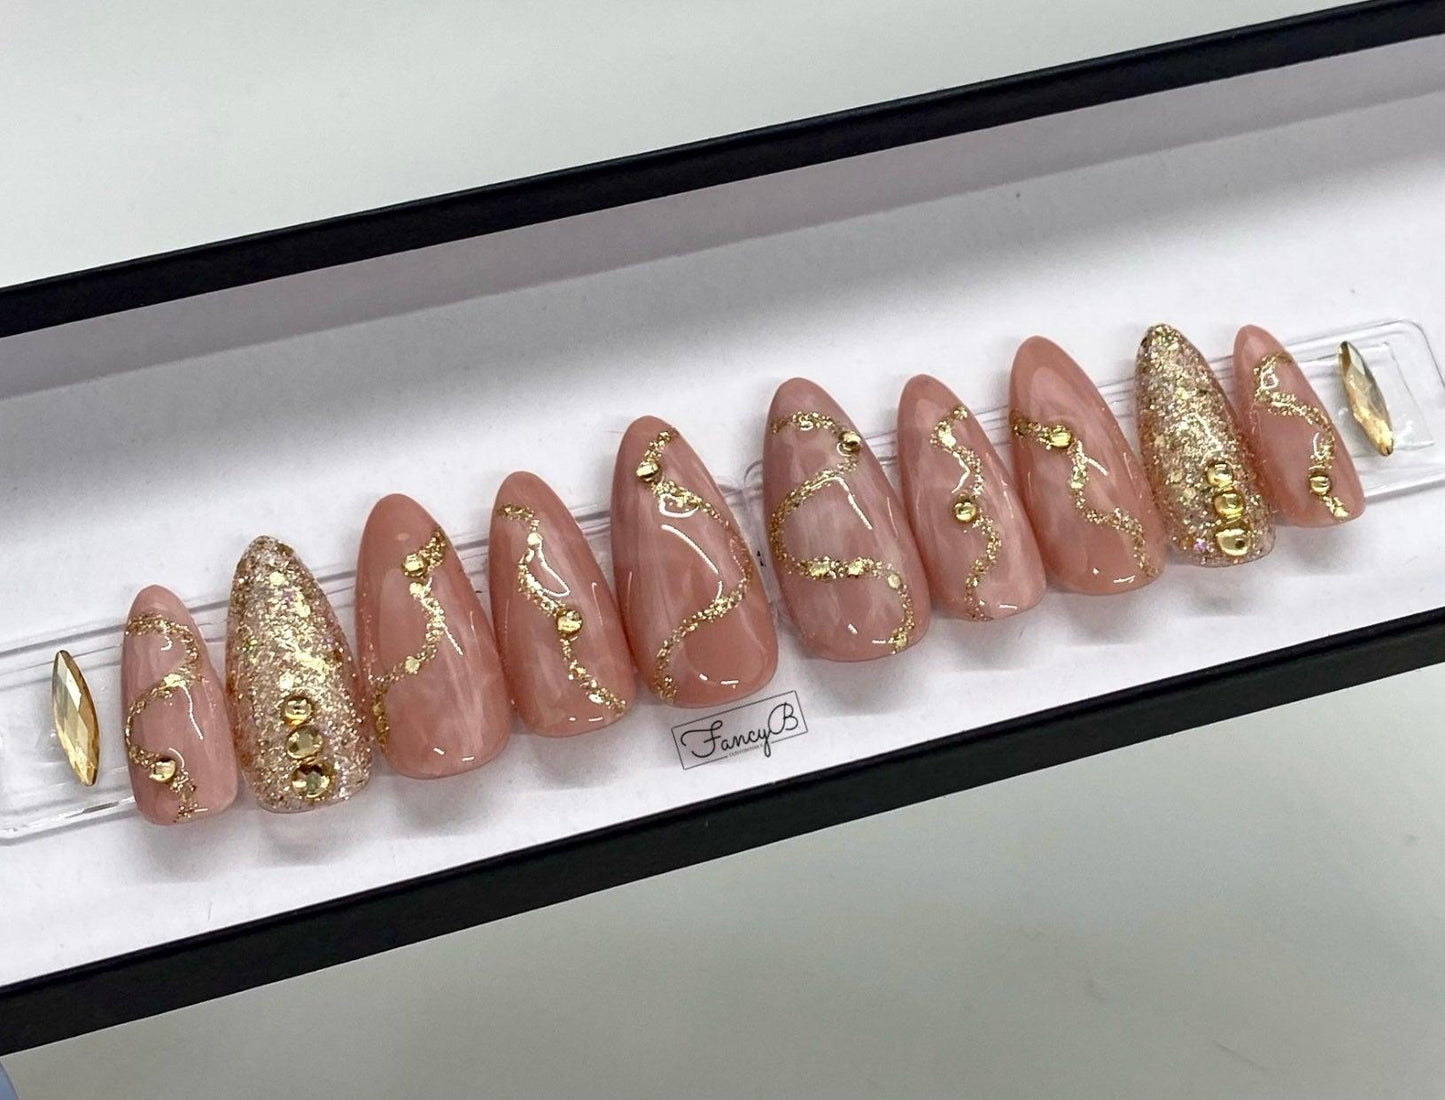 Custom press on nail design in a beautiful rose quartz design with gold glitter accents and gold gems all in a long almond shape.